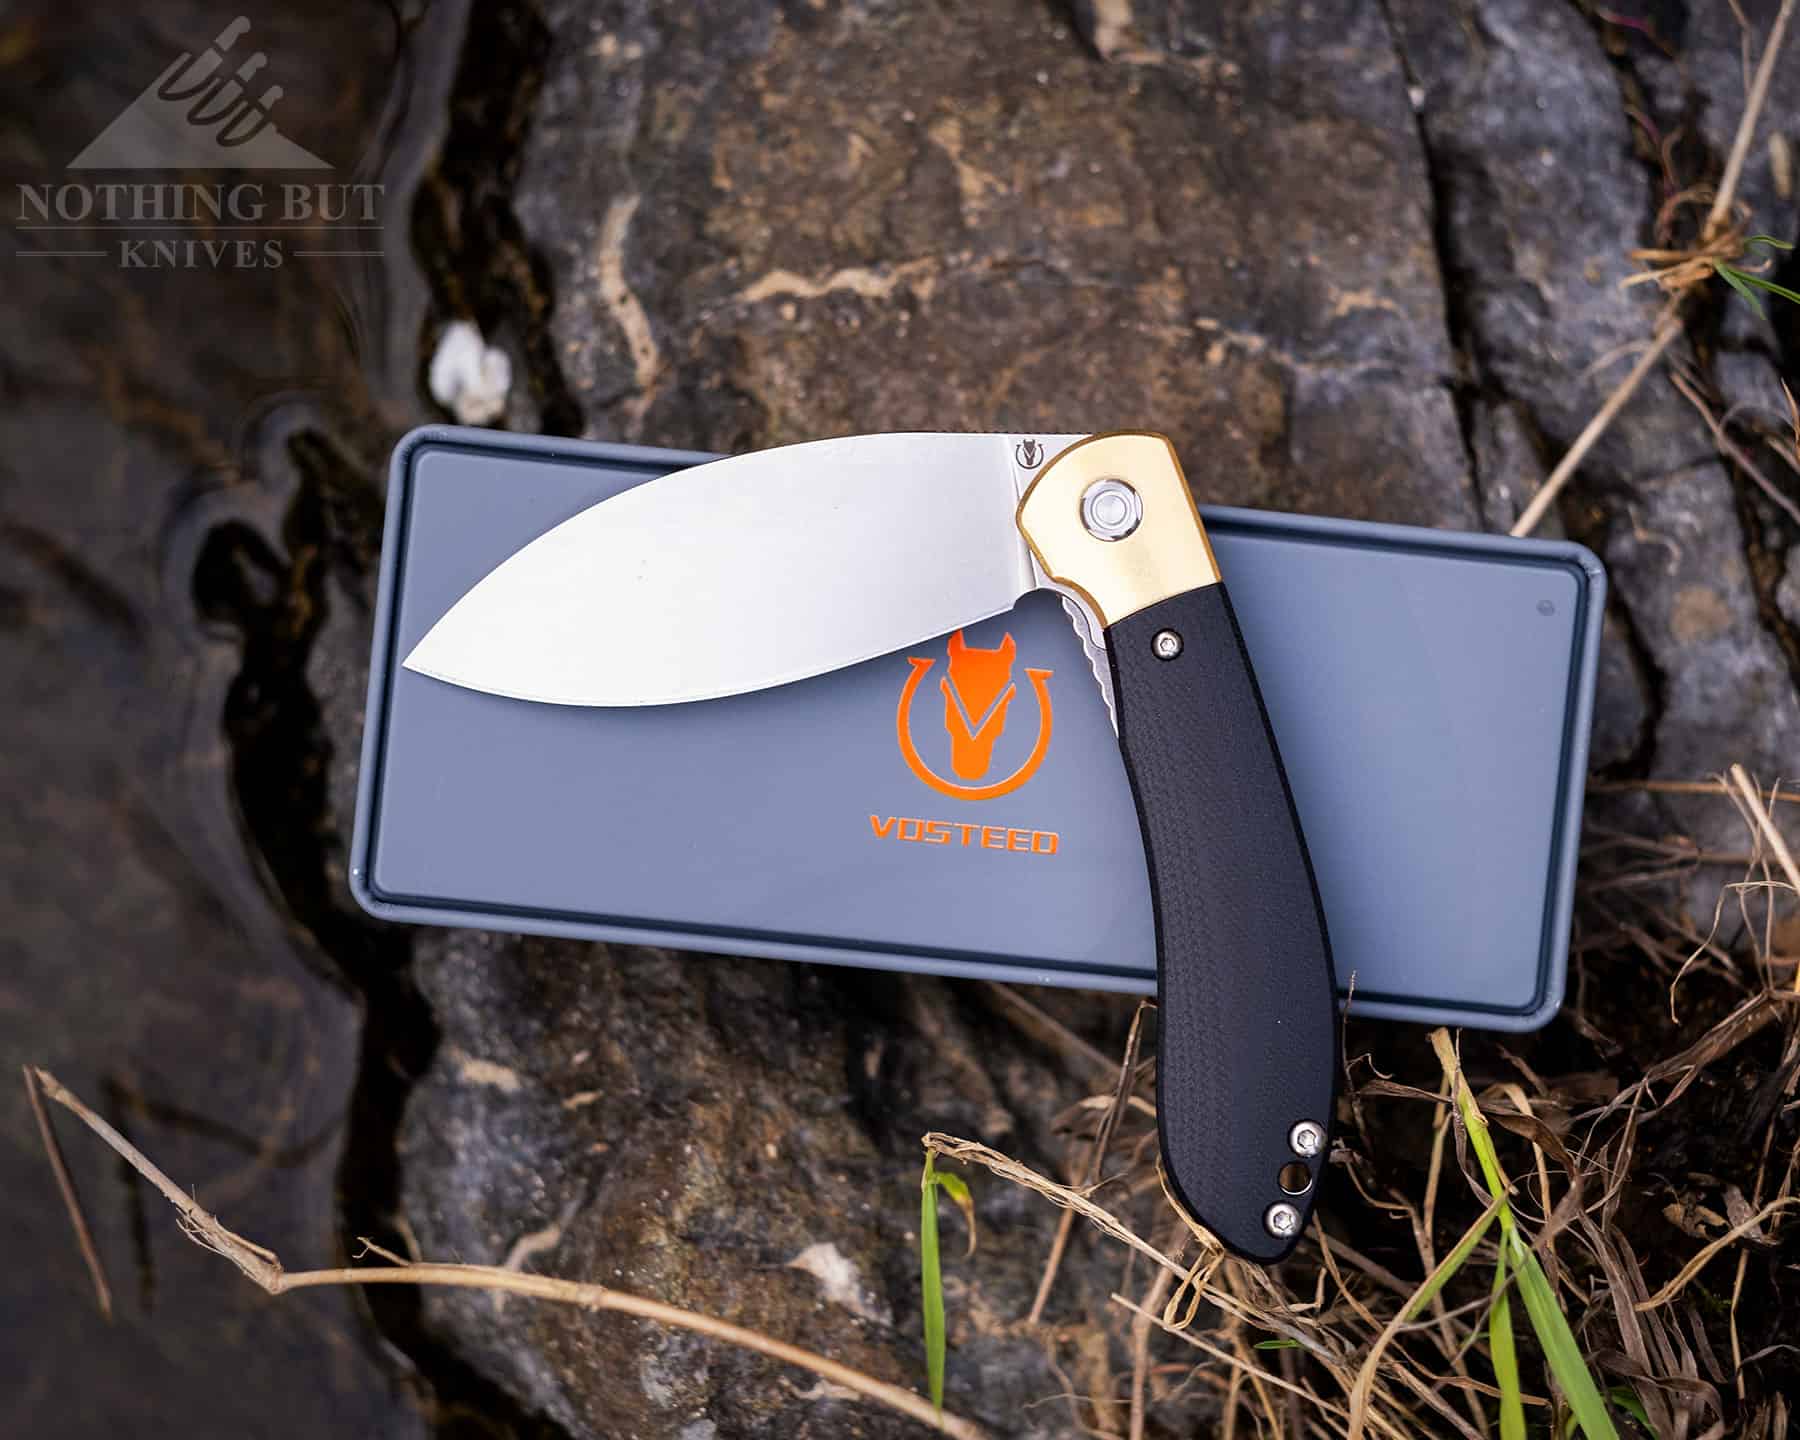 Vosteed folding knife on it's shipping case with the logo.